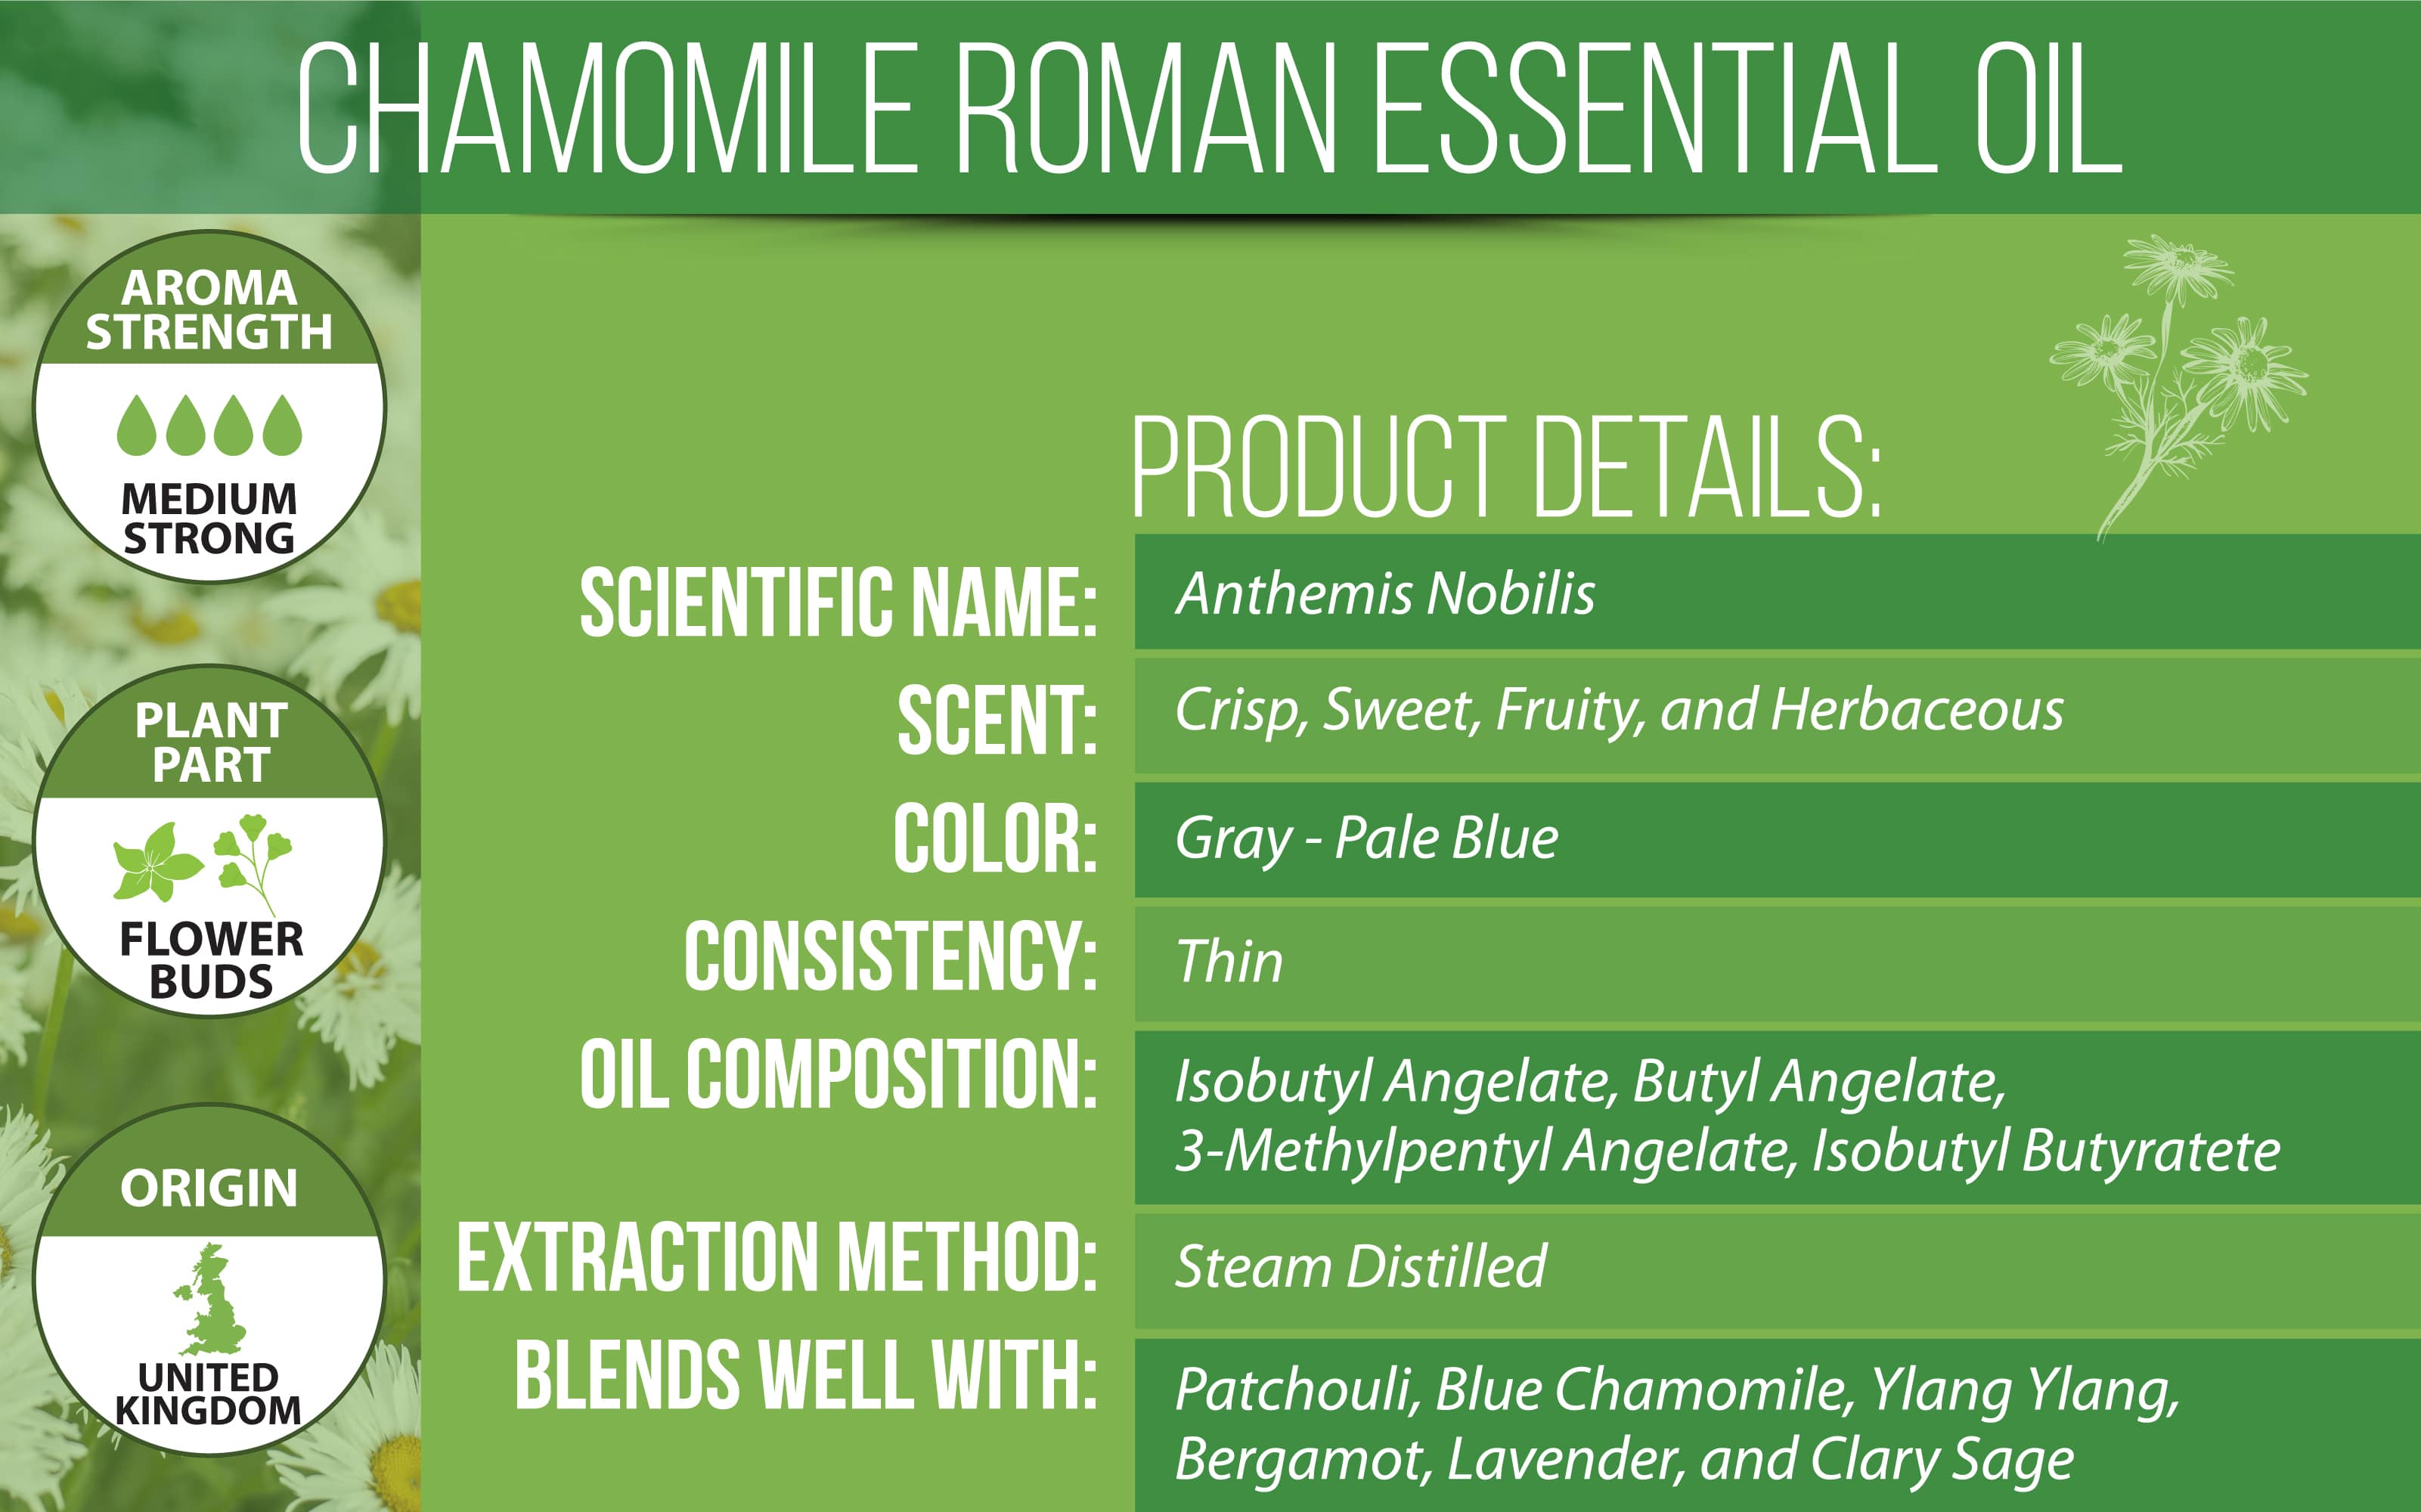 Evoke Calming Effects with Roman Chamomile Essential Oil